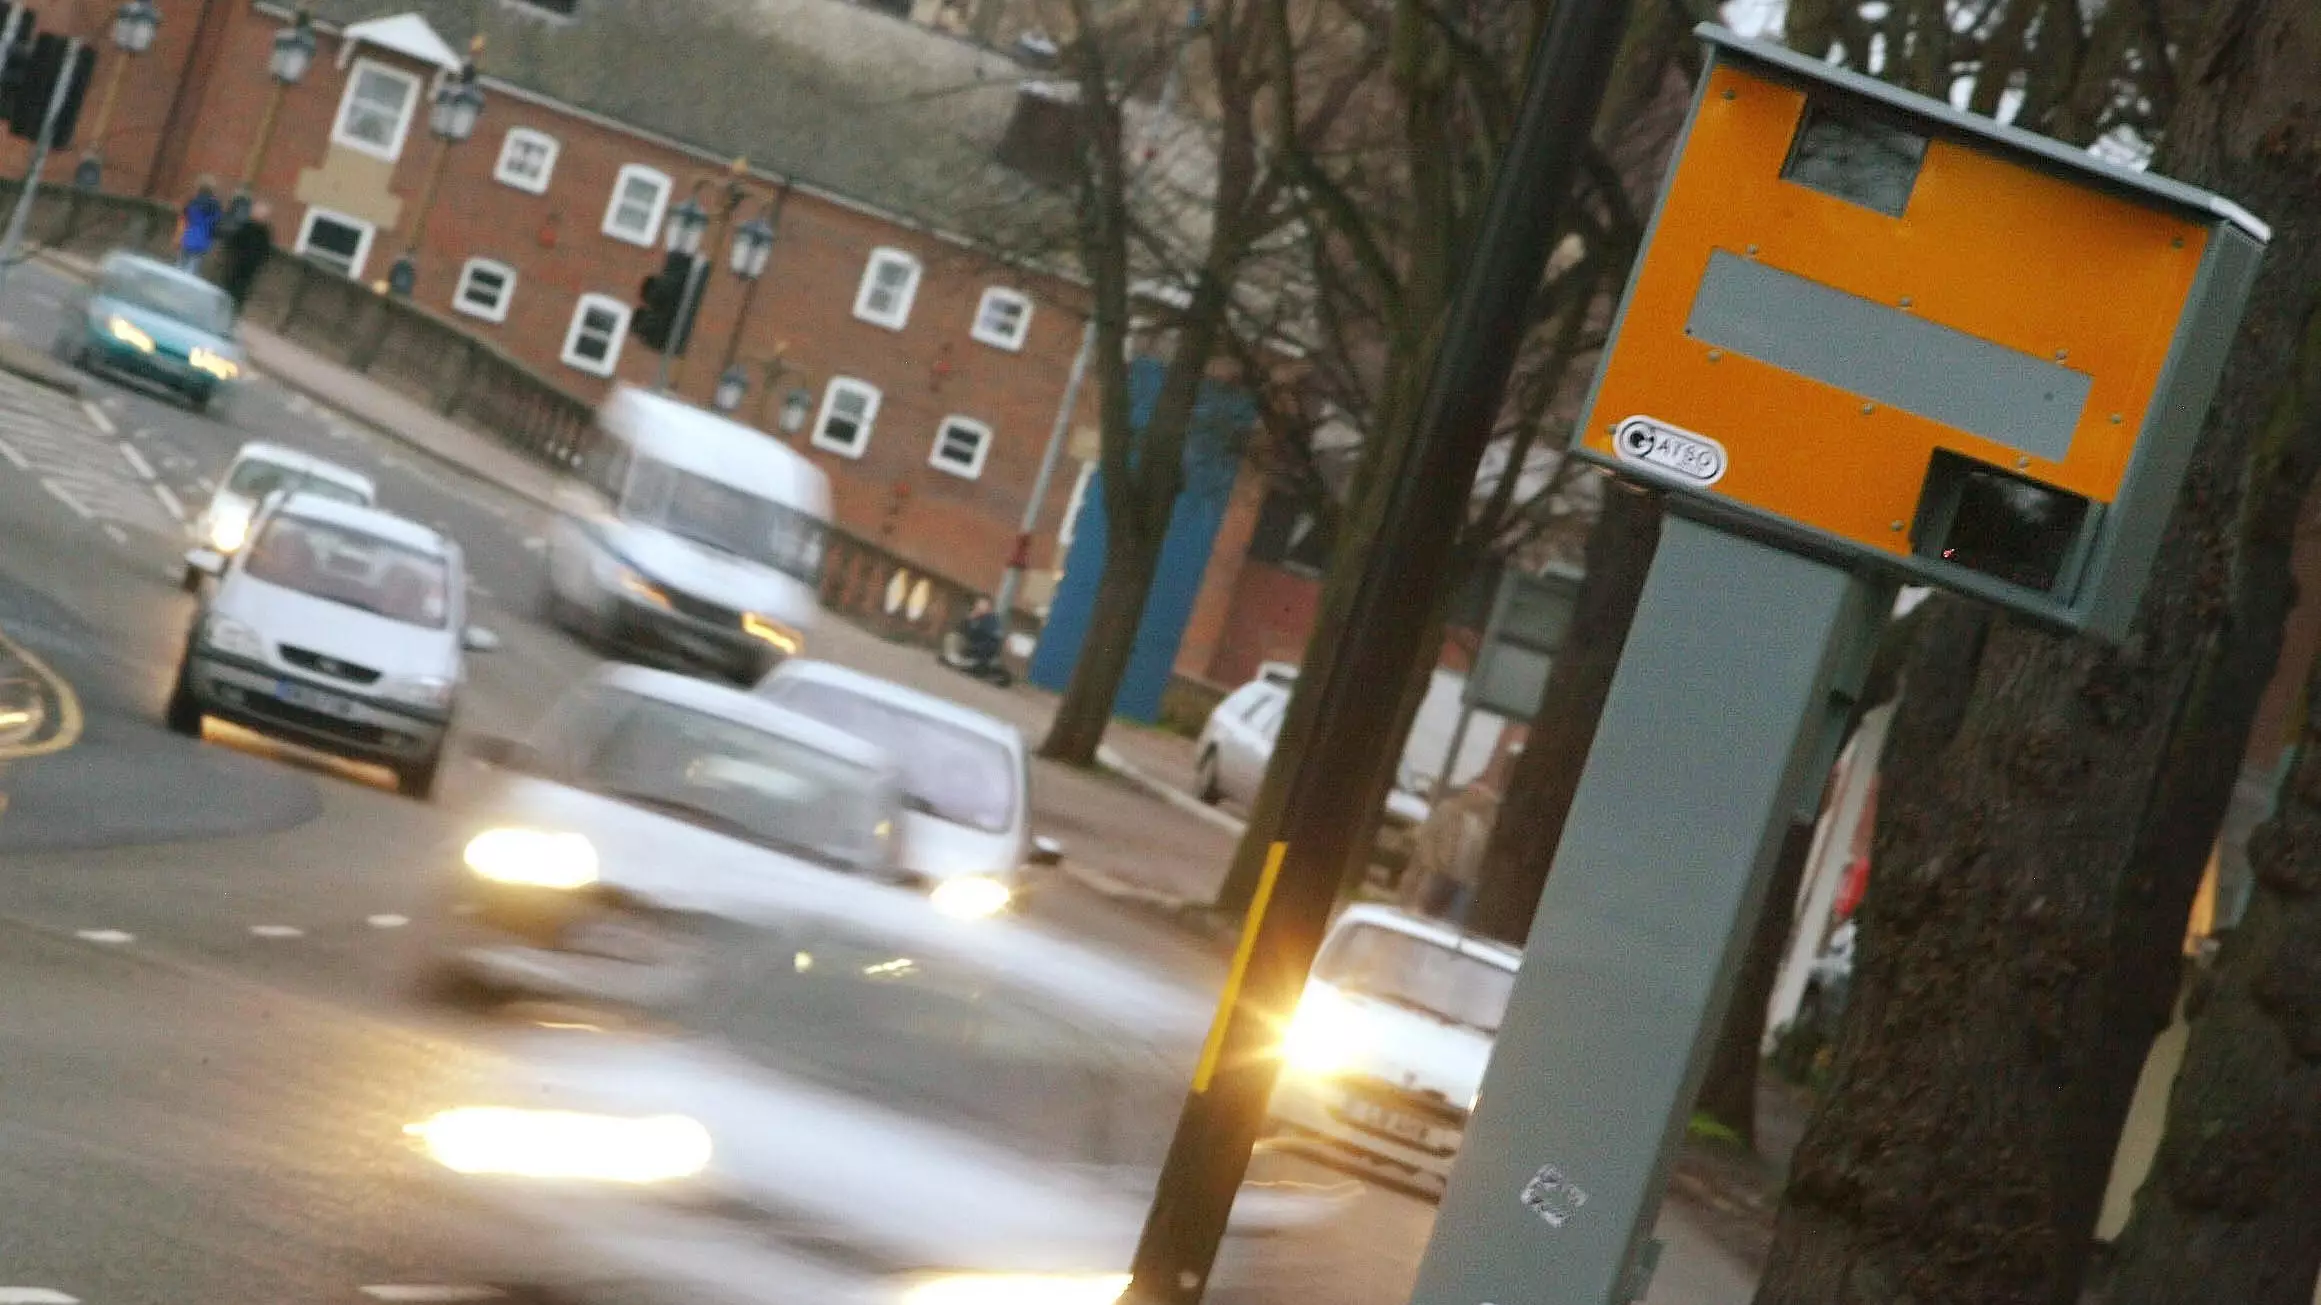 New Rules Could Mean Drivers Fined £100 For Speeding By 1mph